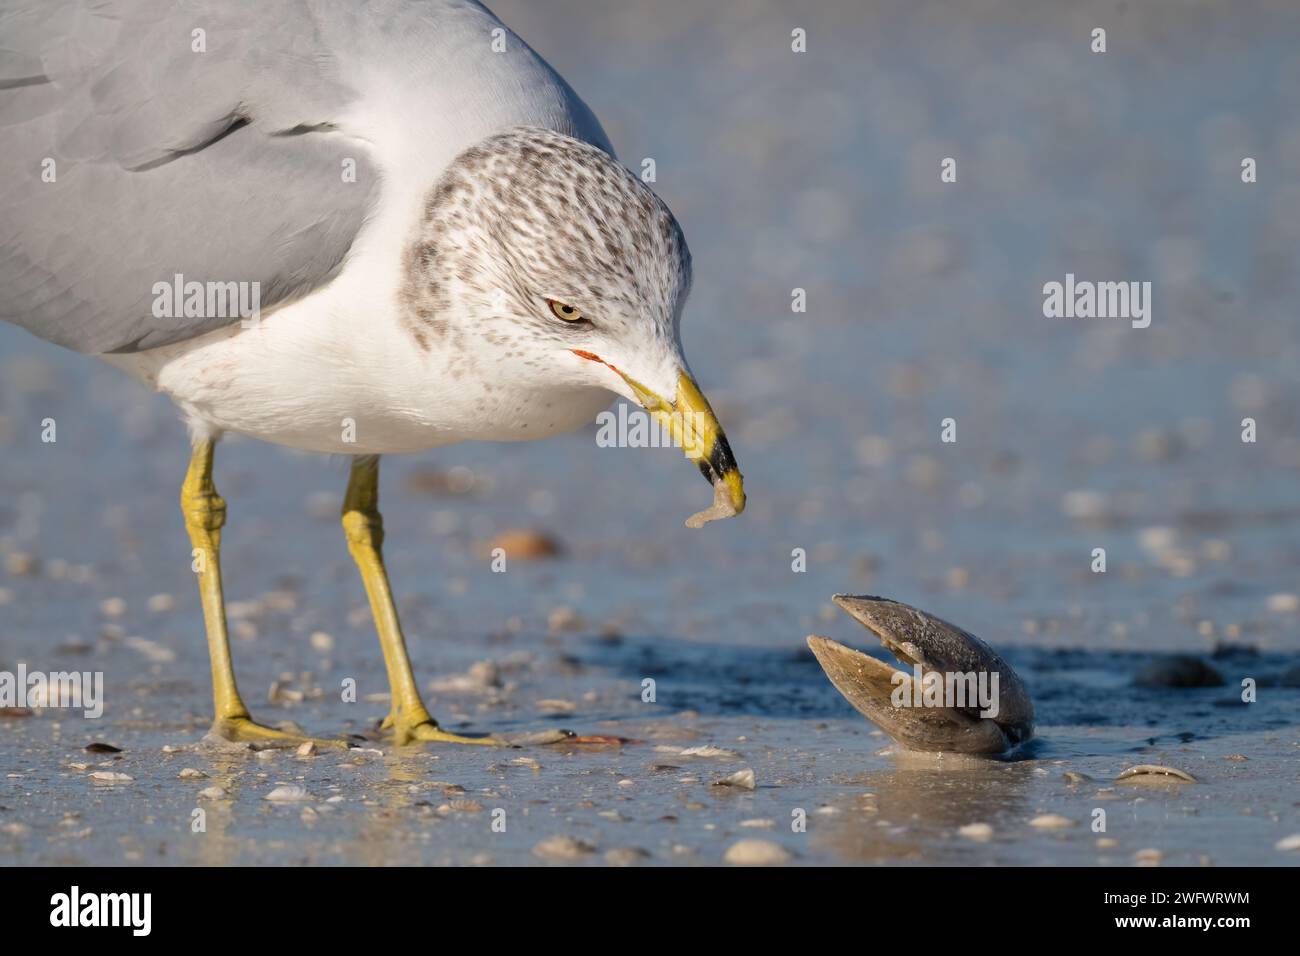 A ring-billed gull eats a sunray venus clam after breaking it open at Honeymoon Island State Park in Dunedin, Florida. Stock Photo